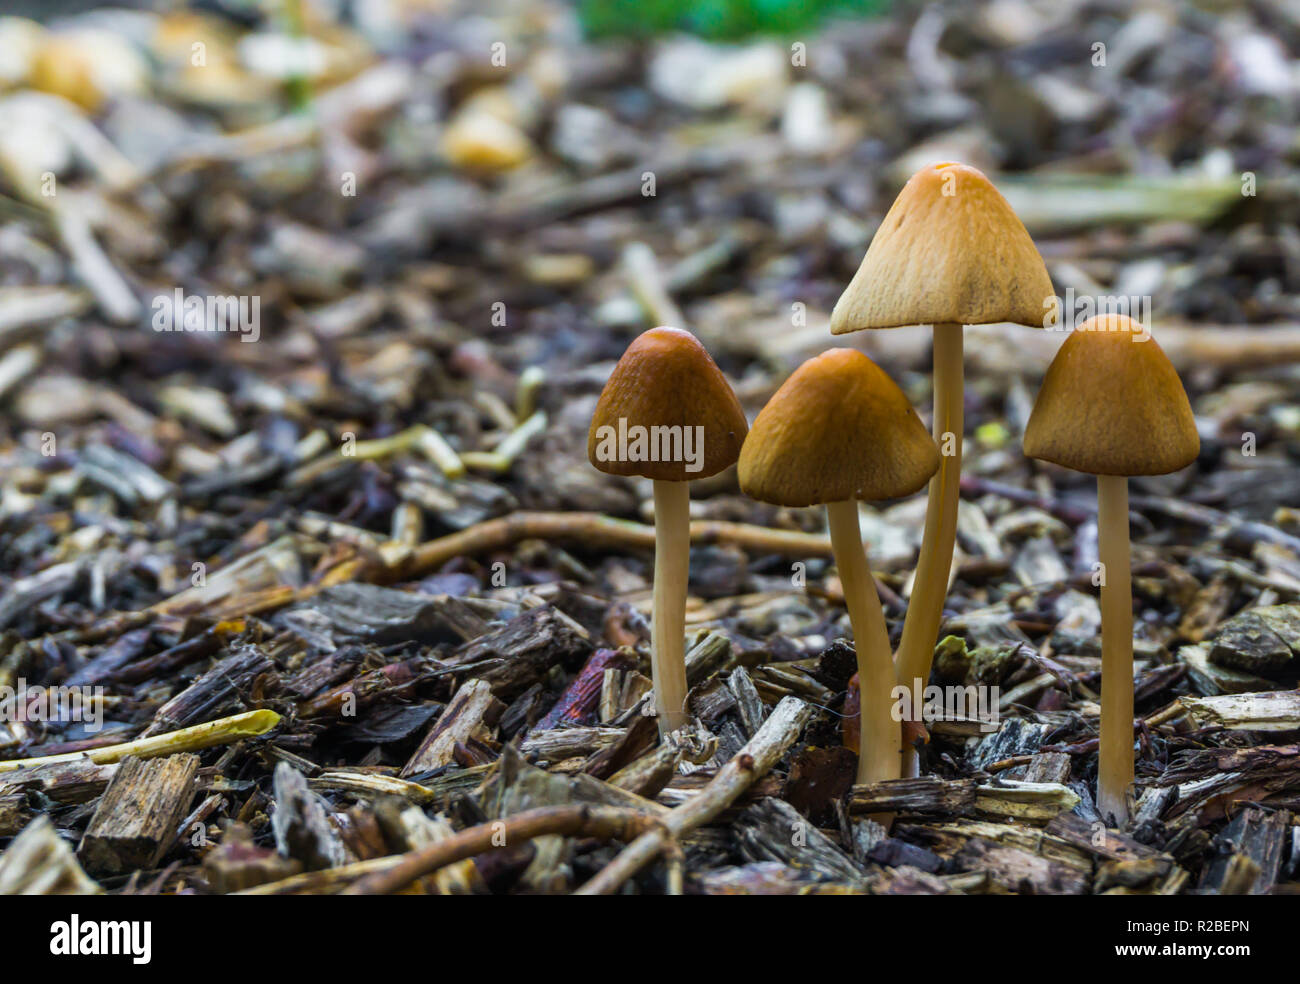 group of white dunce cap mushrooms with bell-shaped caps growing in the forest natural autumn season background Stock Photo